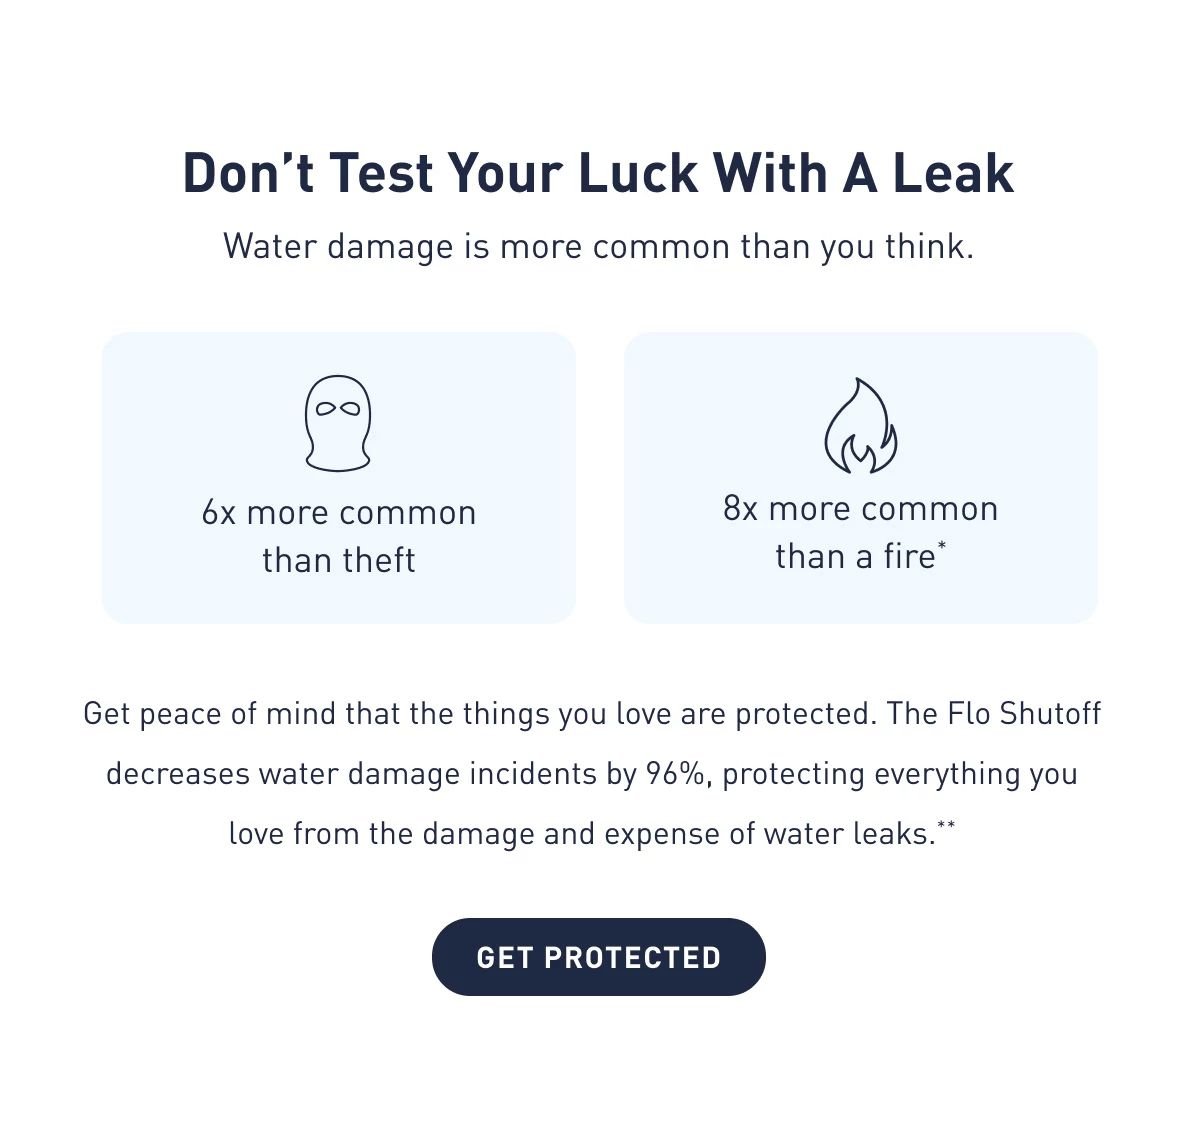 Don’t Test Your Luck With A Leak - Water damage is more common than you think. | Get peace of mind that the things you love are protected. The Flo Shutoff decreases water damage incidents by 96%, protecting everything you love from the damage and expense of water leaks.** | Get Protected >